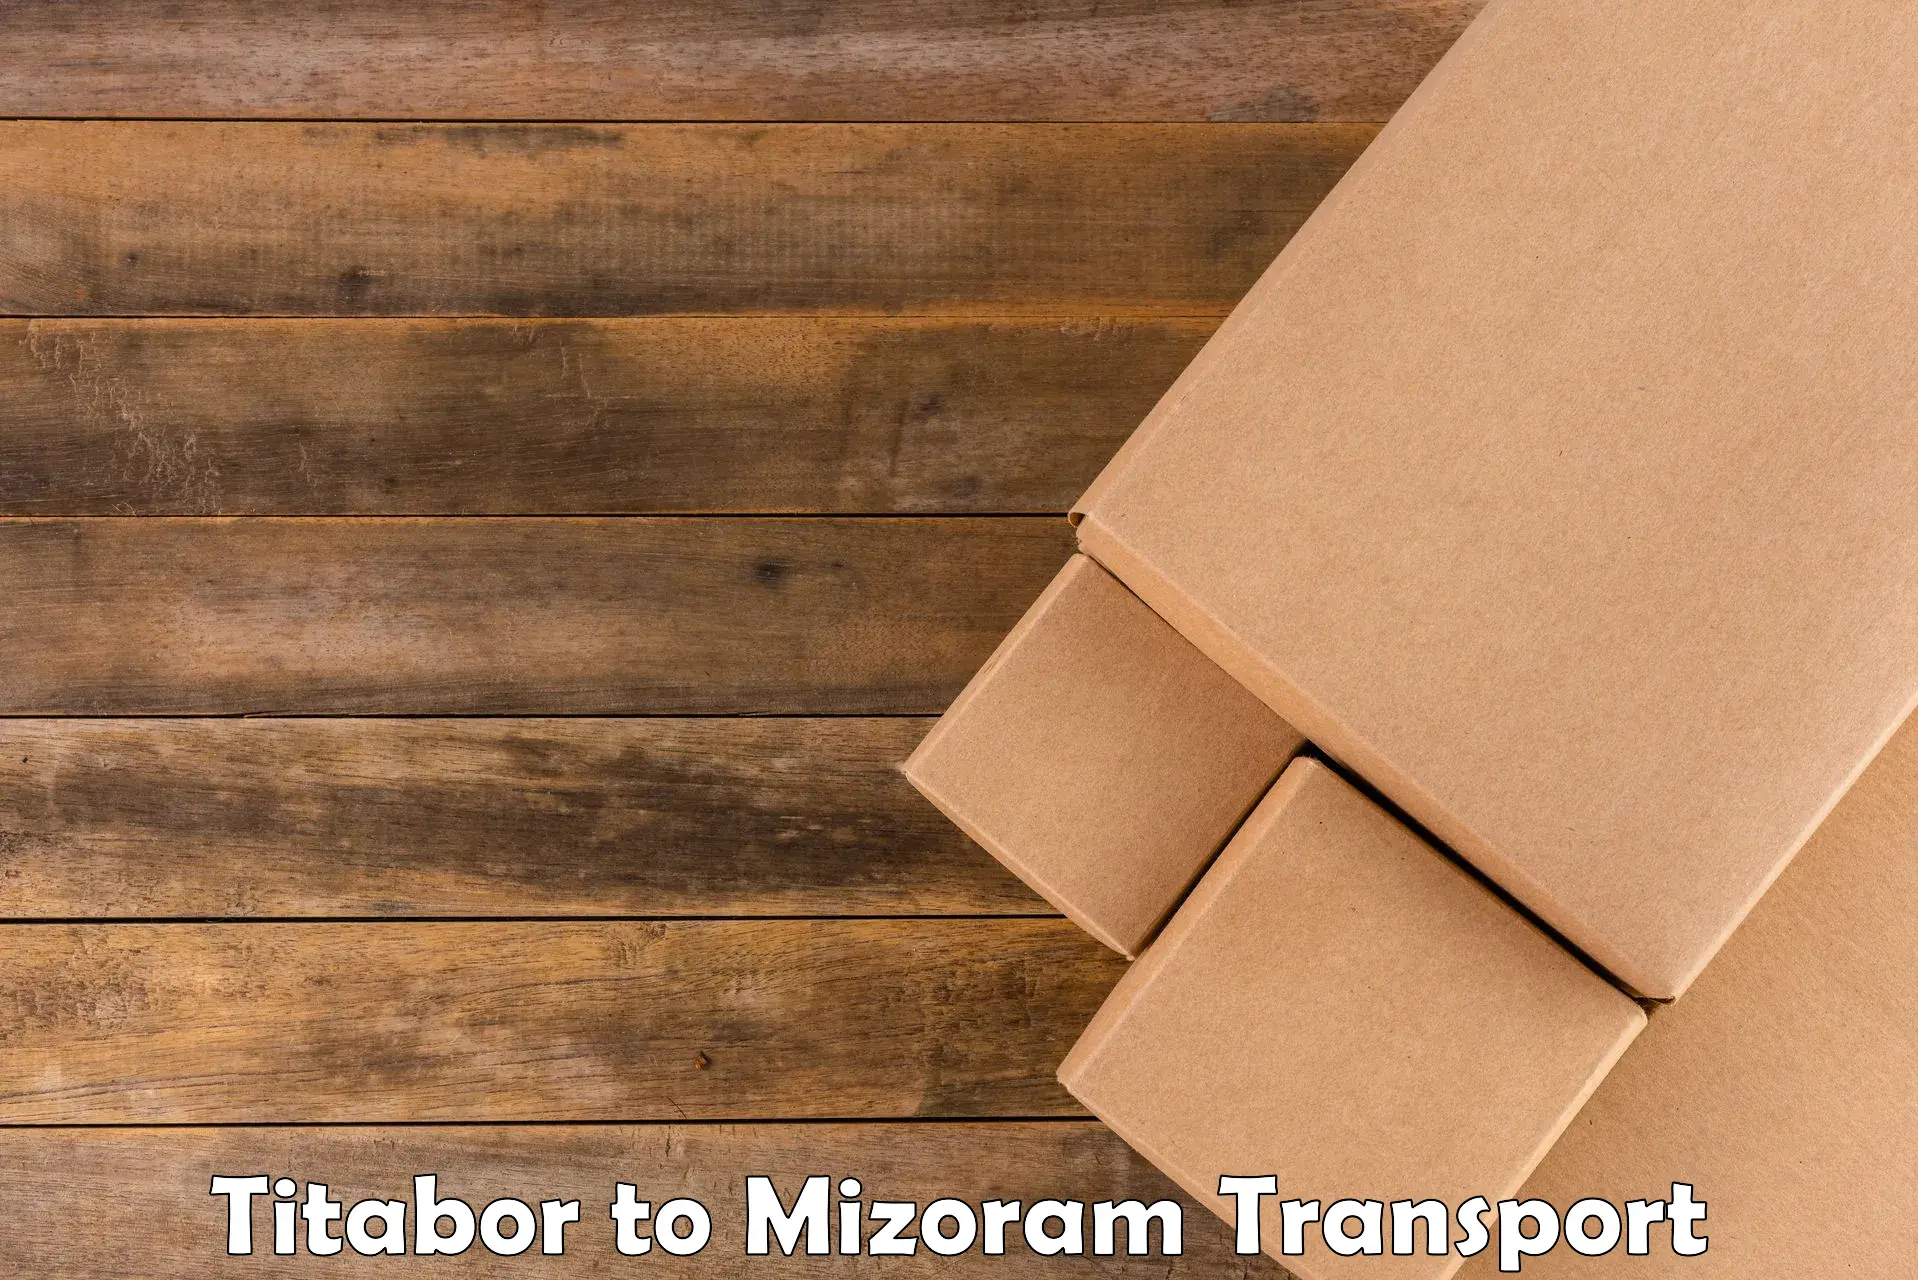 Transport bike from one state to another Titabor to Mizoram